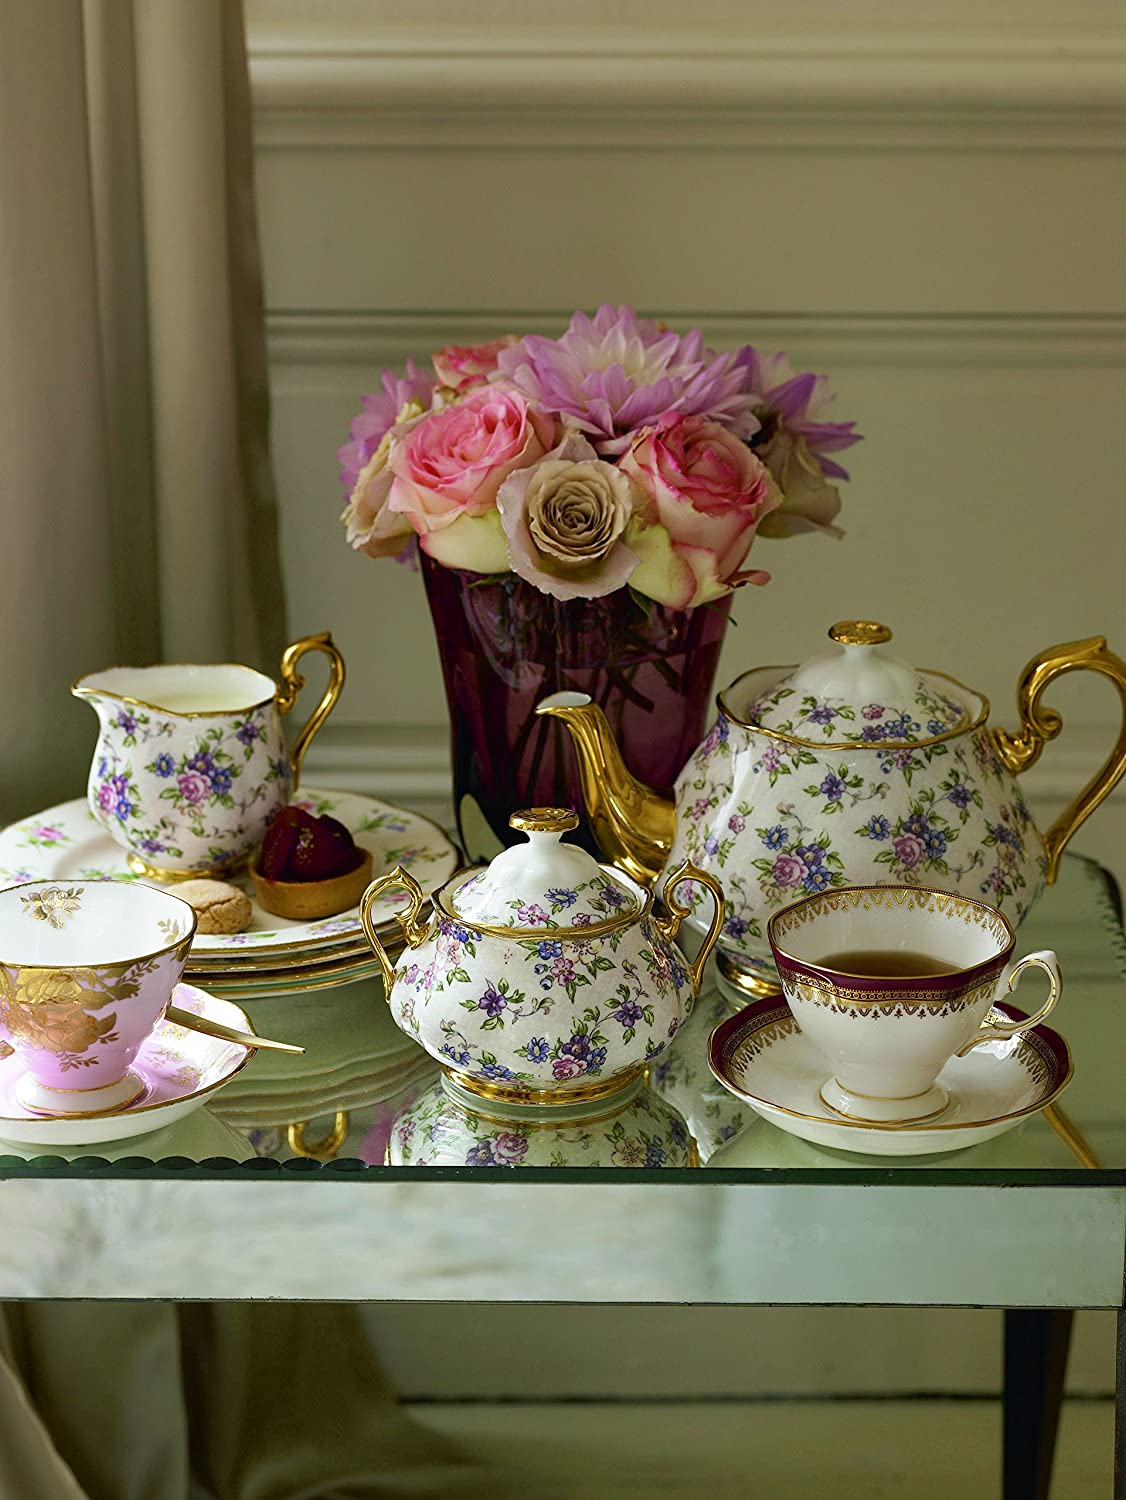 English High Tea Style Guide - Host An English Afternoon Tea Party